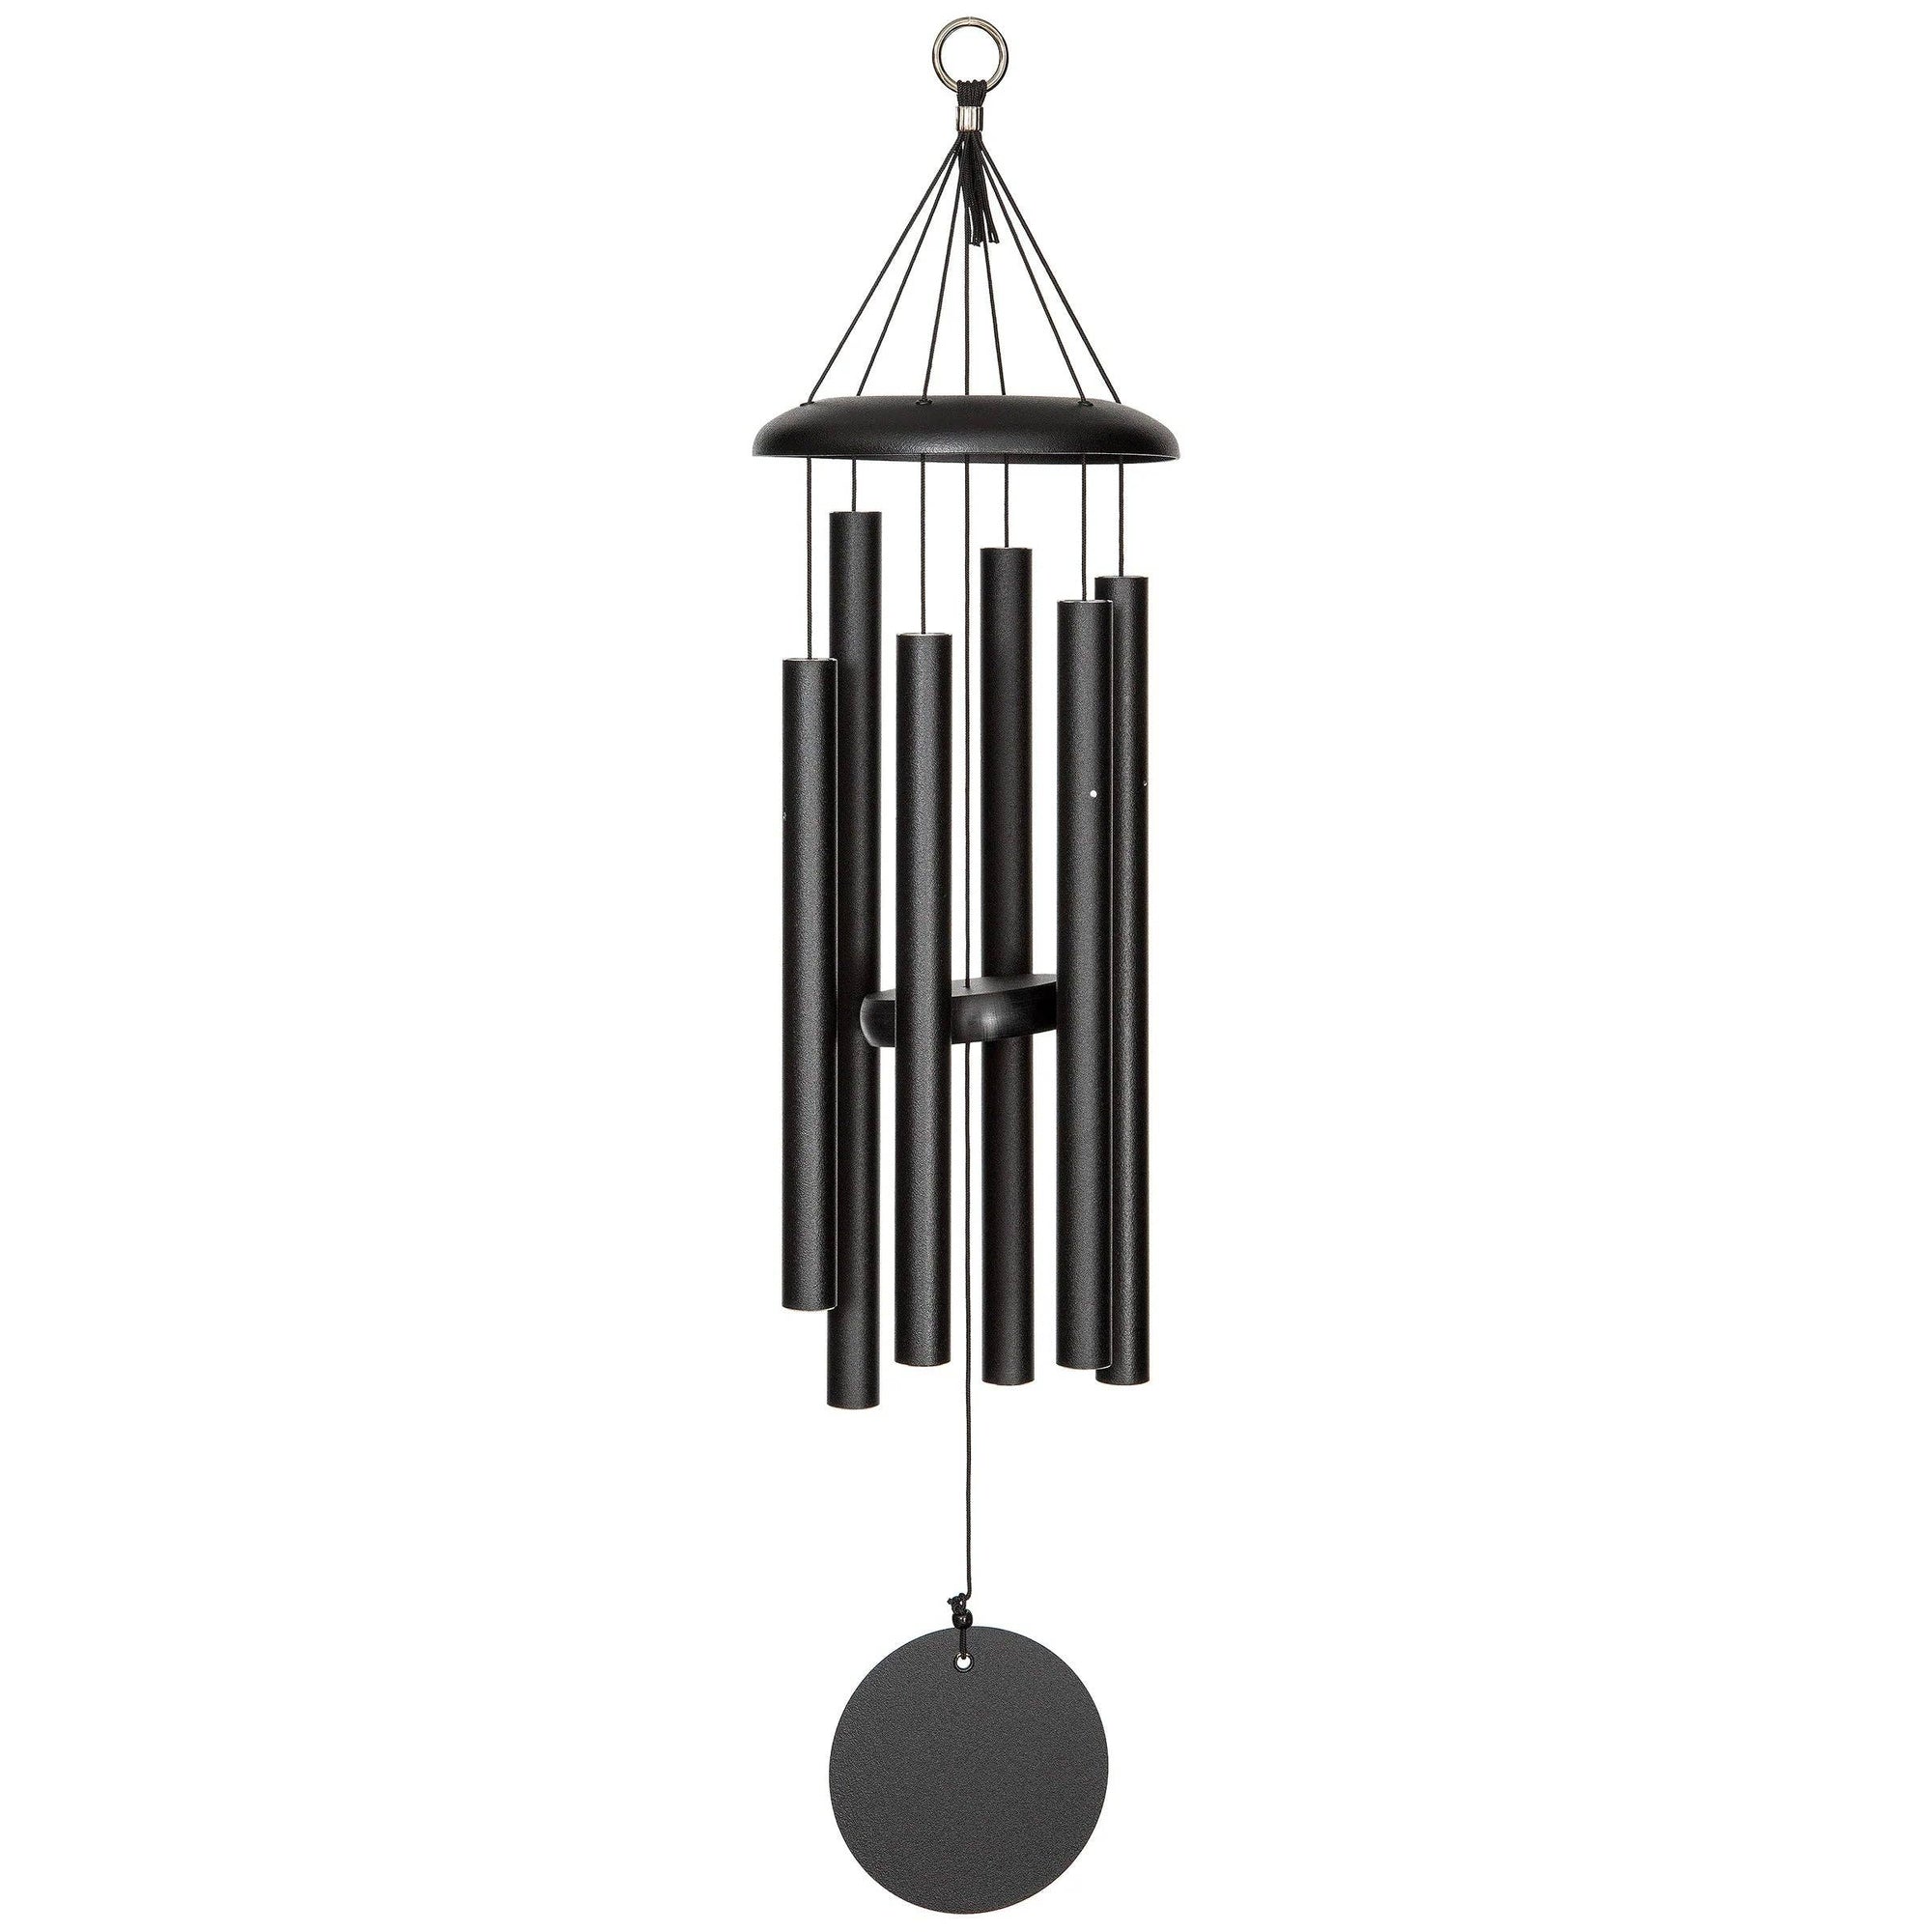 A Corinthian Bells® 30-inch Windchime with a circle, perfect for a small patio or balcony.